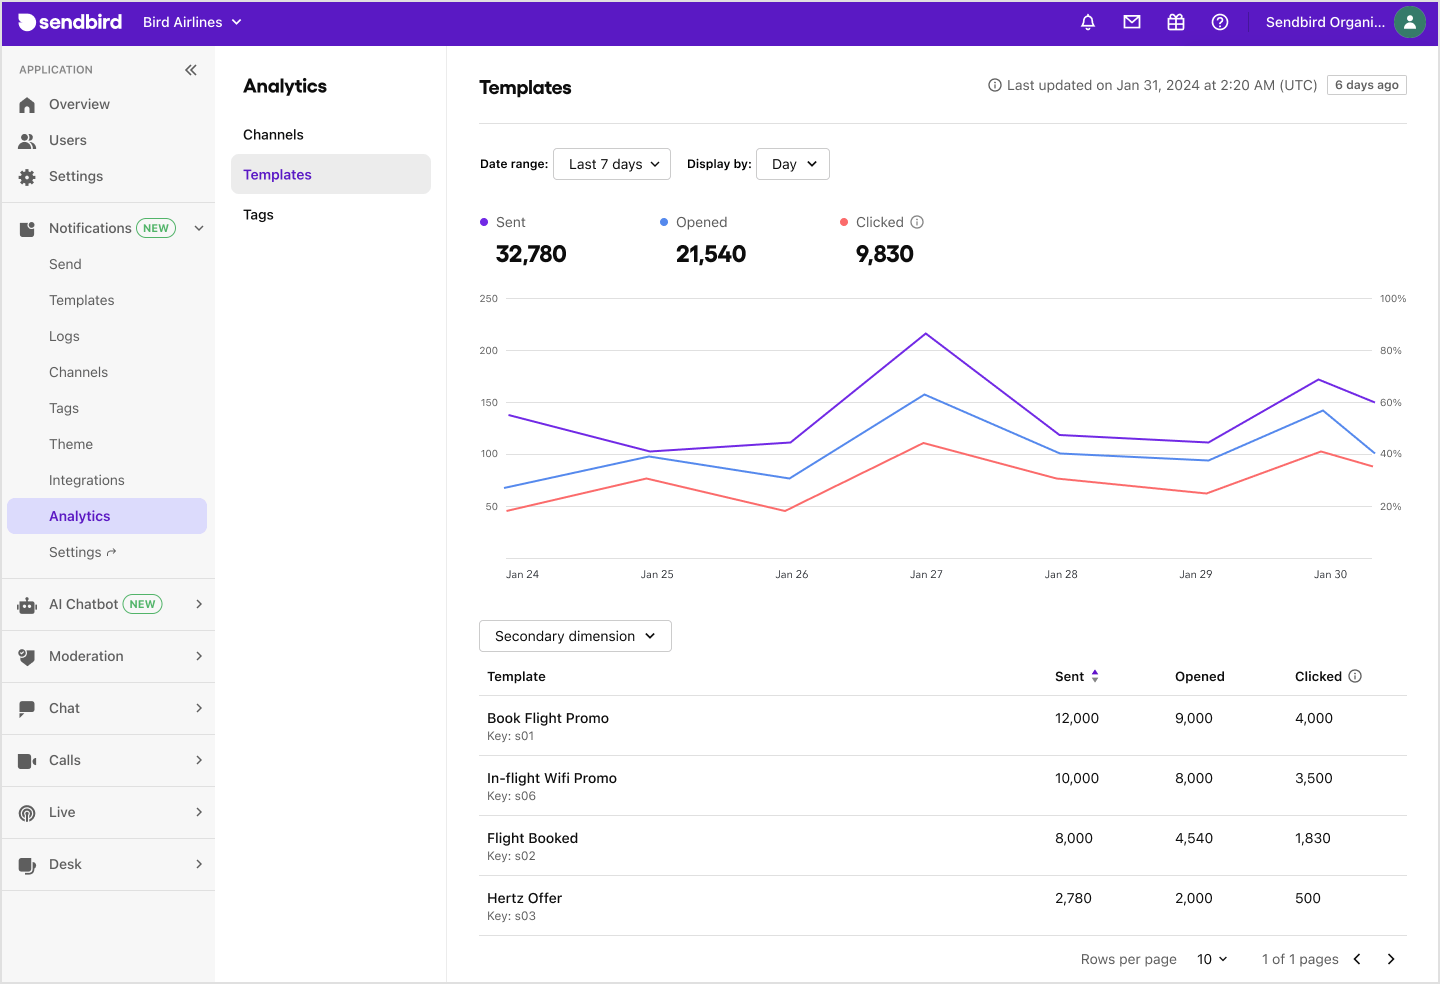 image|The Templates tab for the Analytics page on Sendbird Dashboard